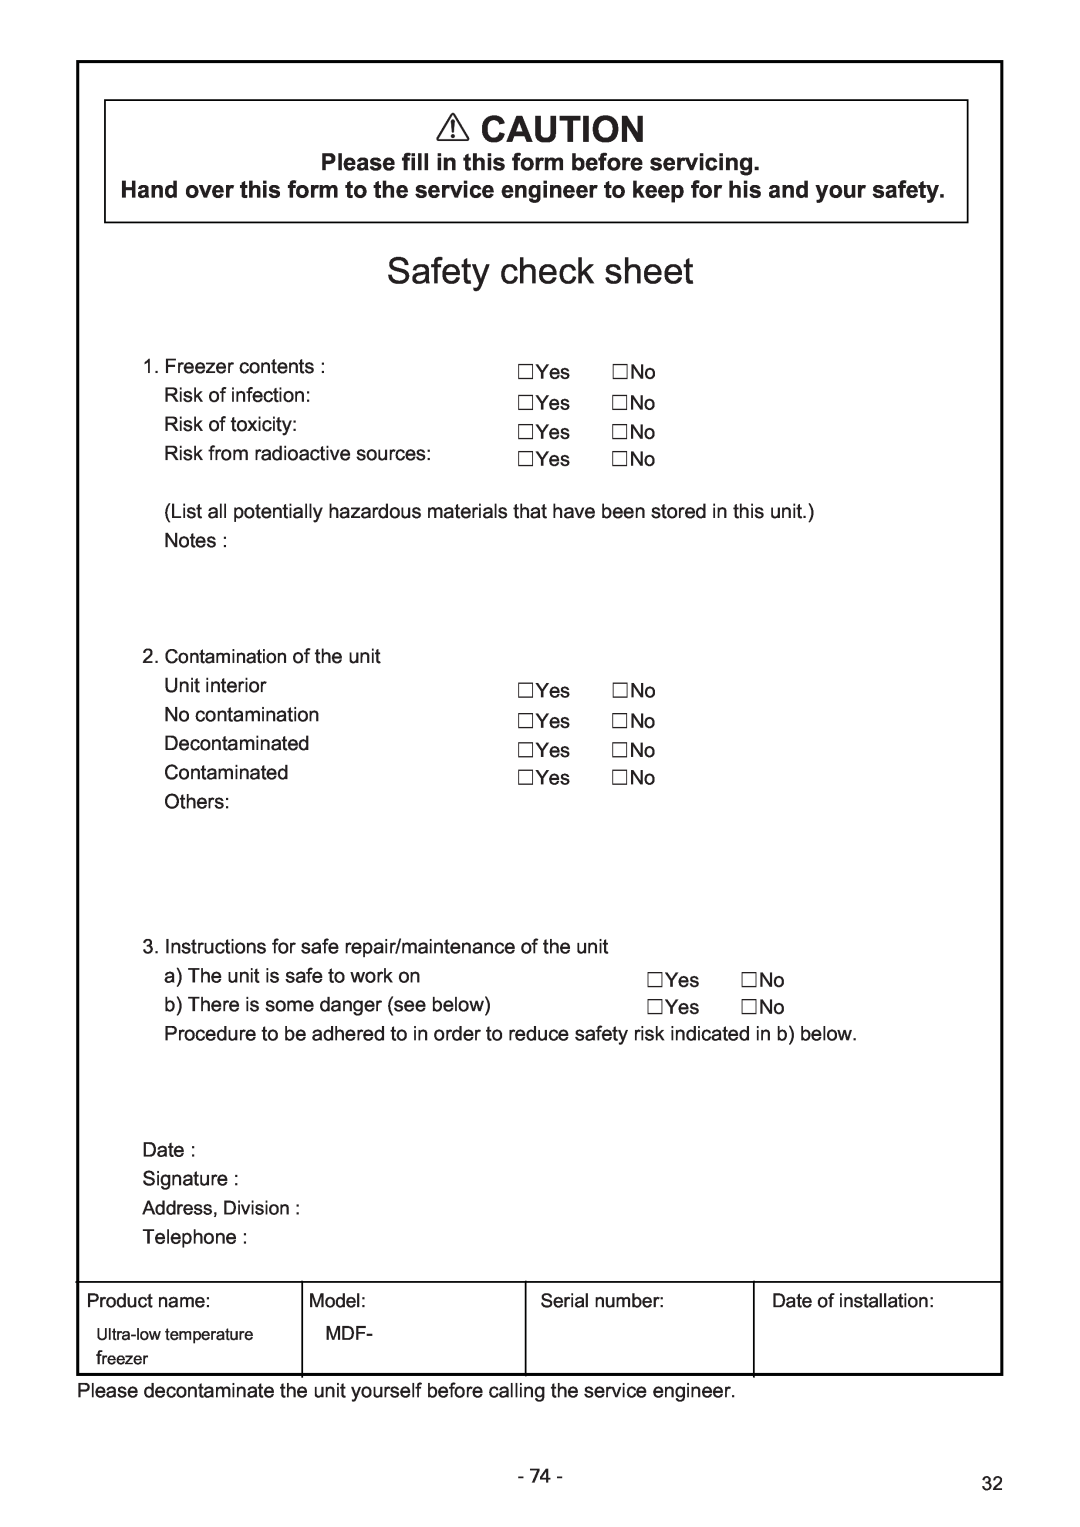 Sanyo MDF-U7486SC, MDF-U5486SC instruction manual Safety check sheet, Please fill in this form before servicing 